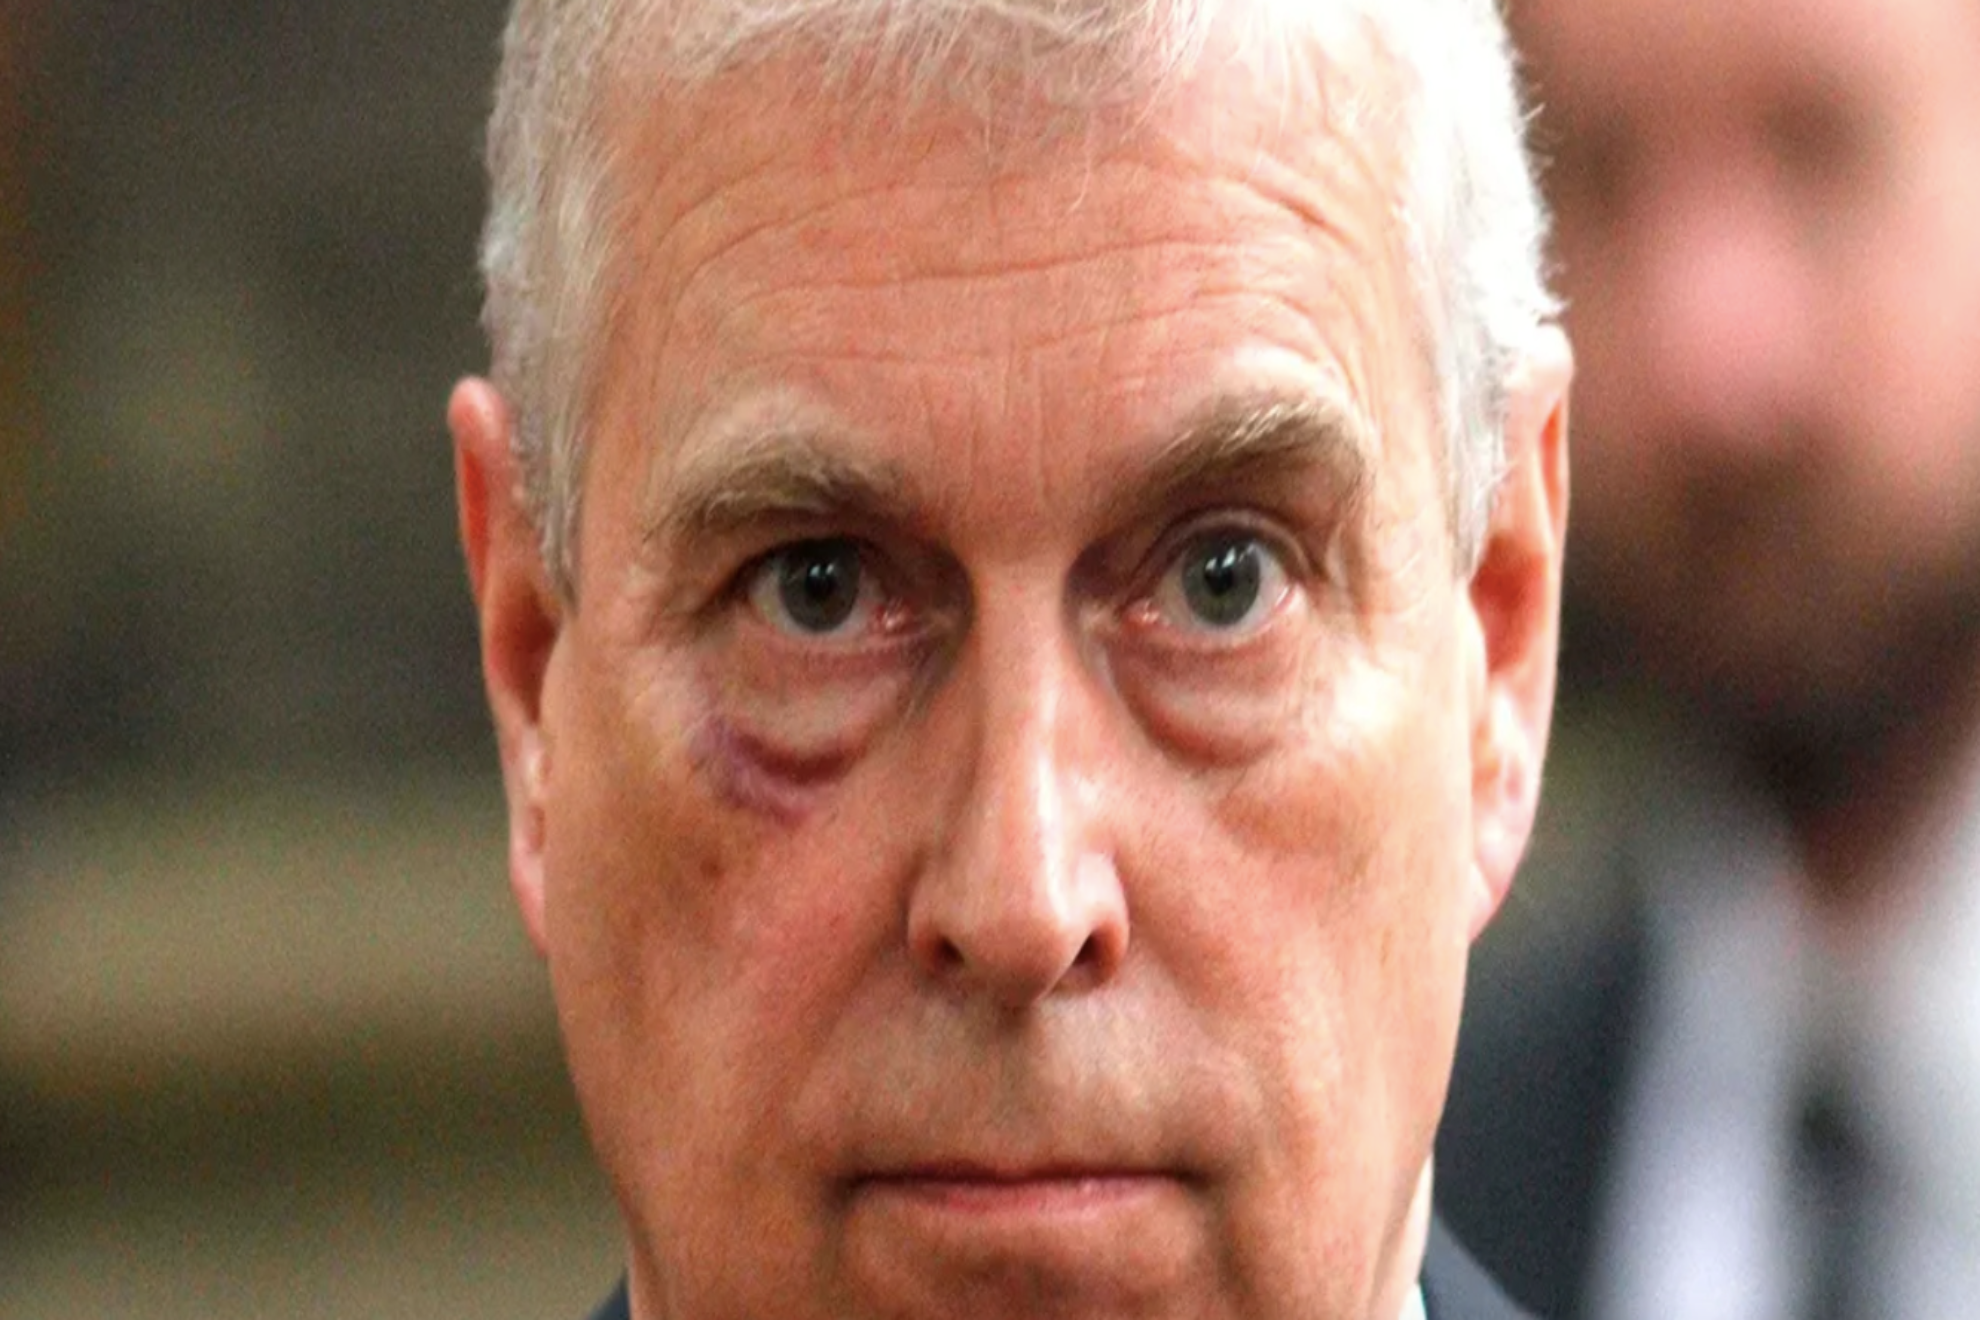 Disgraced Prince Andrew reappears and heads to Easter Service with King Charles